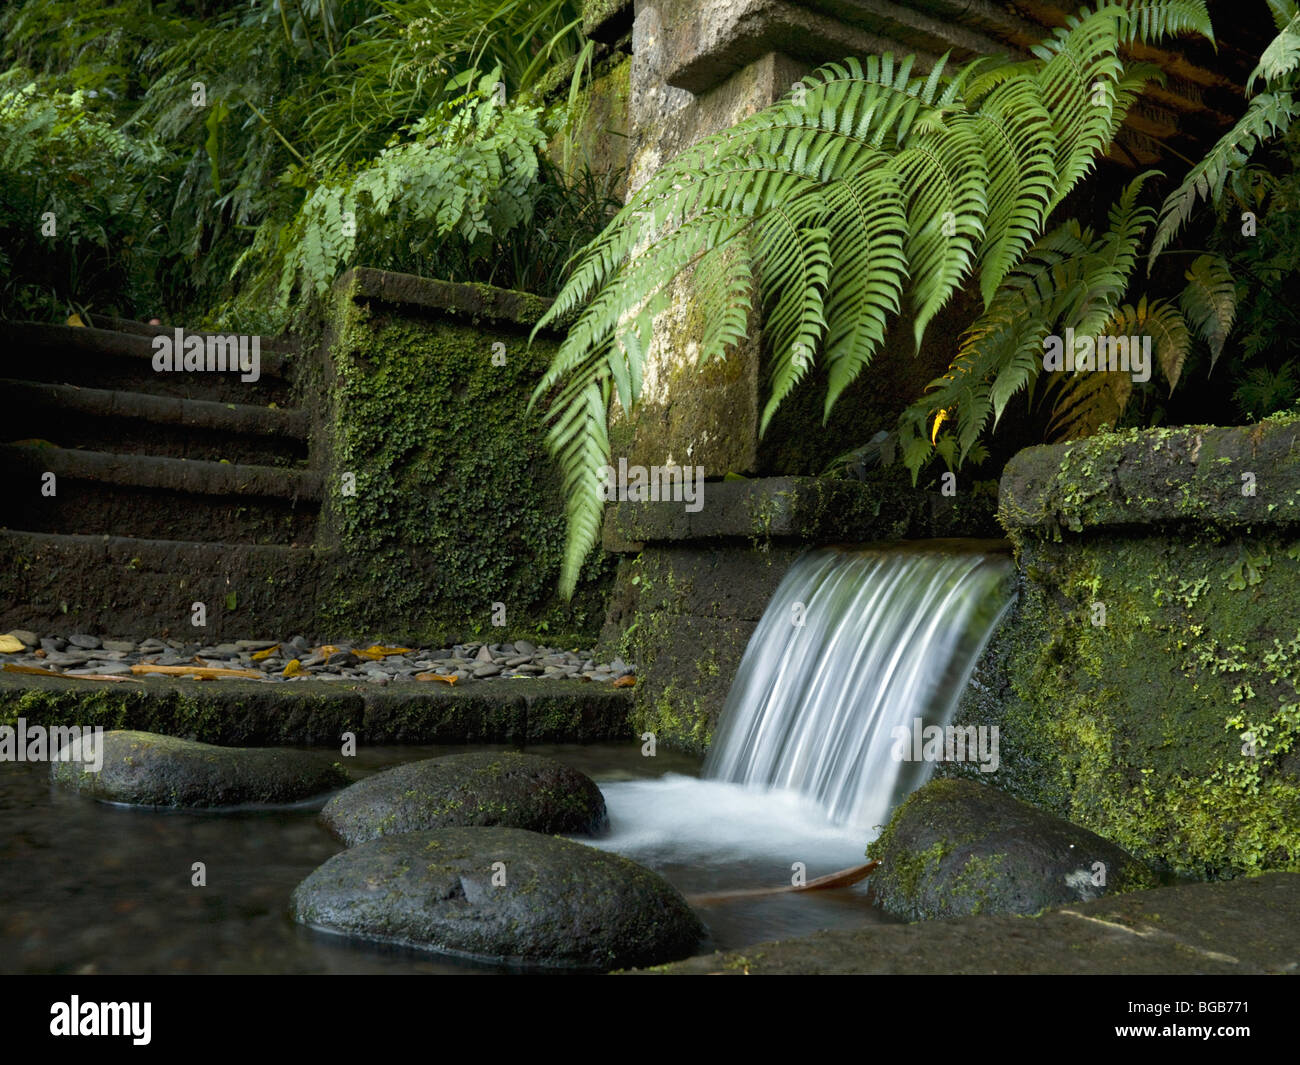 Waterfall Flowing Into A Pond Stock Photo